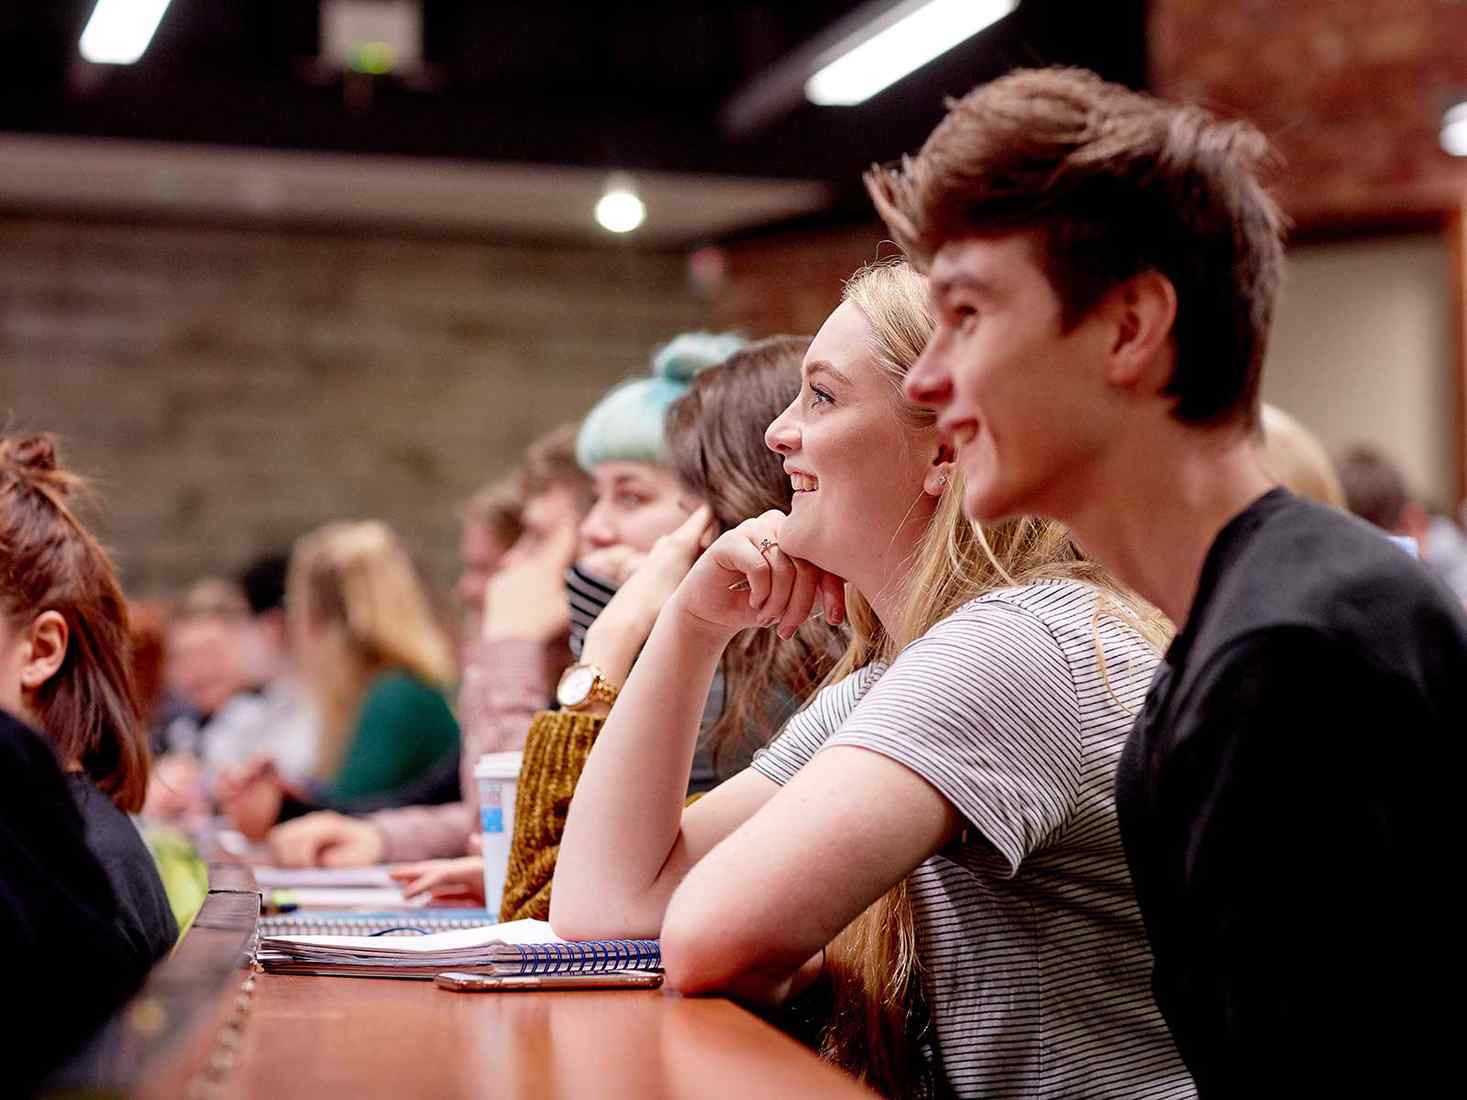 students in lectures, they are smiling  